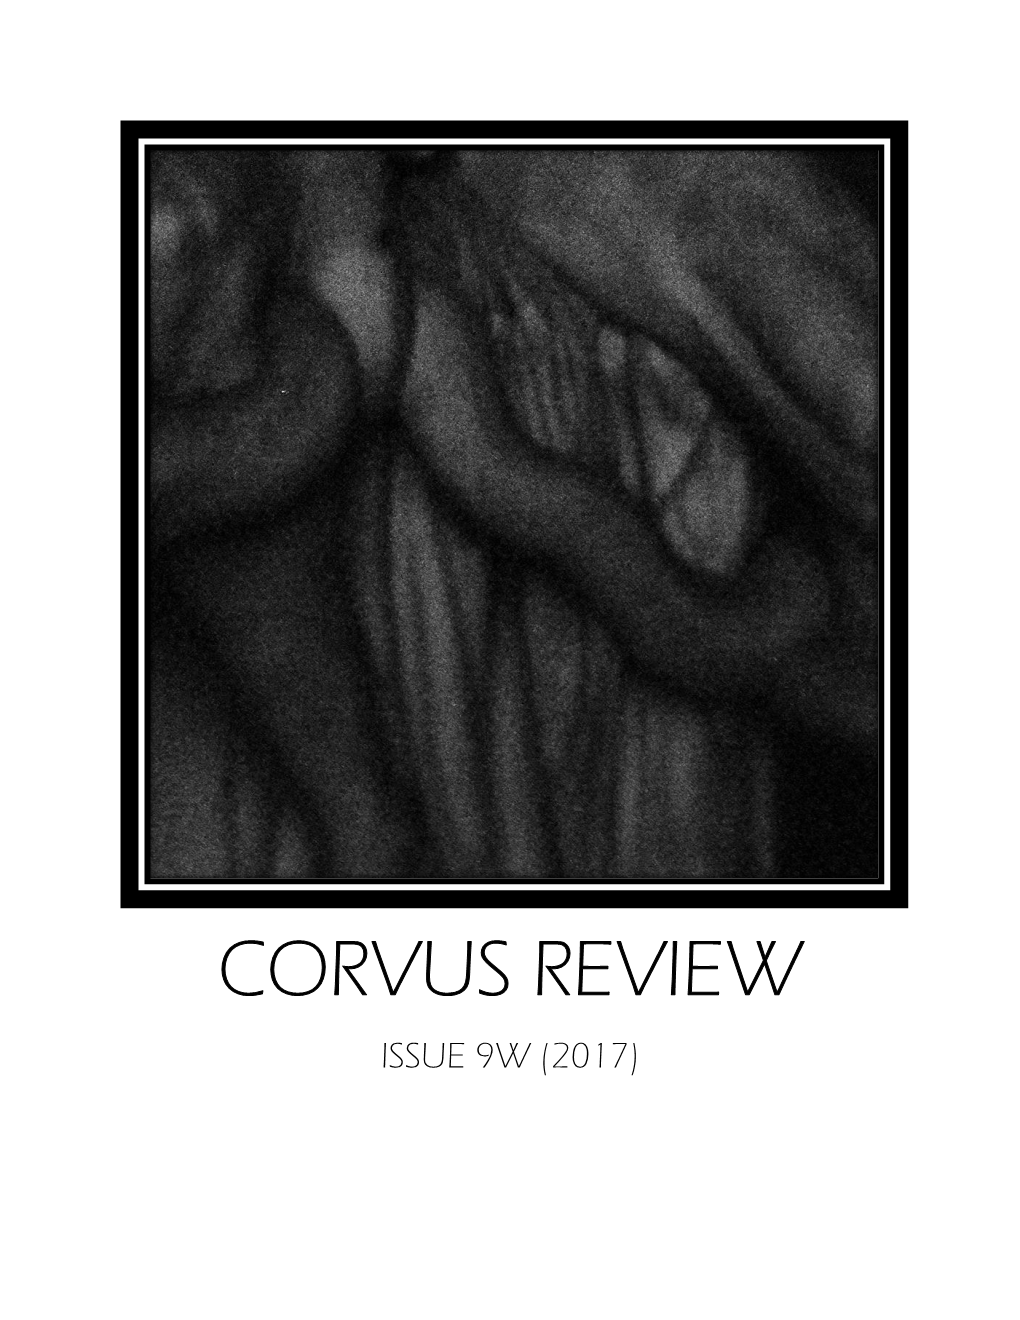 Corvus Review Issue 9W (2017)